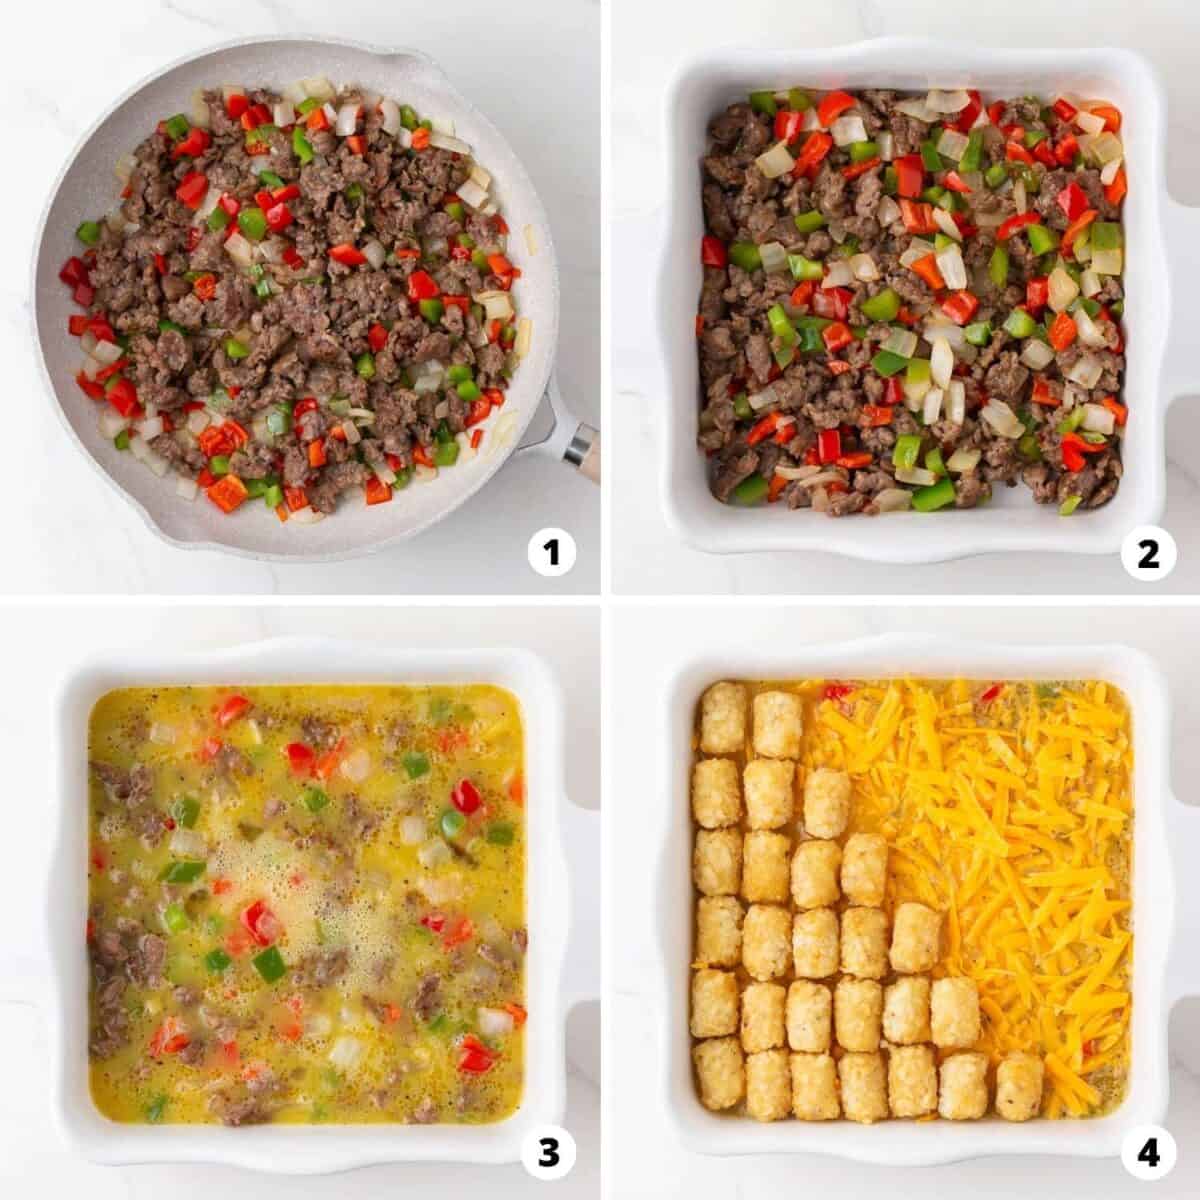 Step by step collage showing how to make tater tot breakfast casserole.